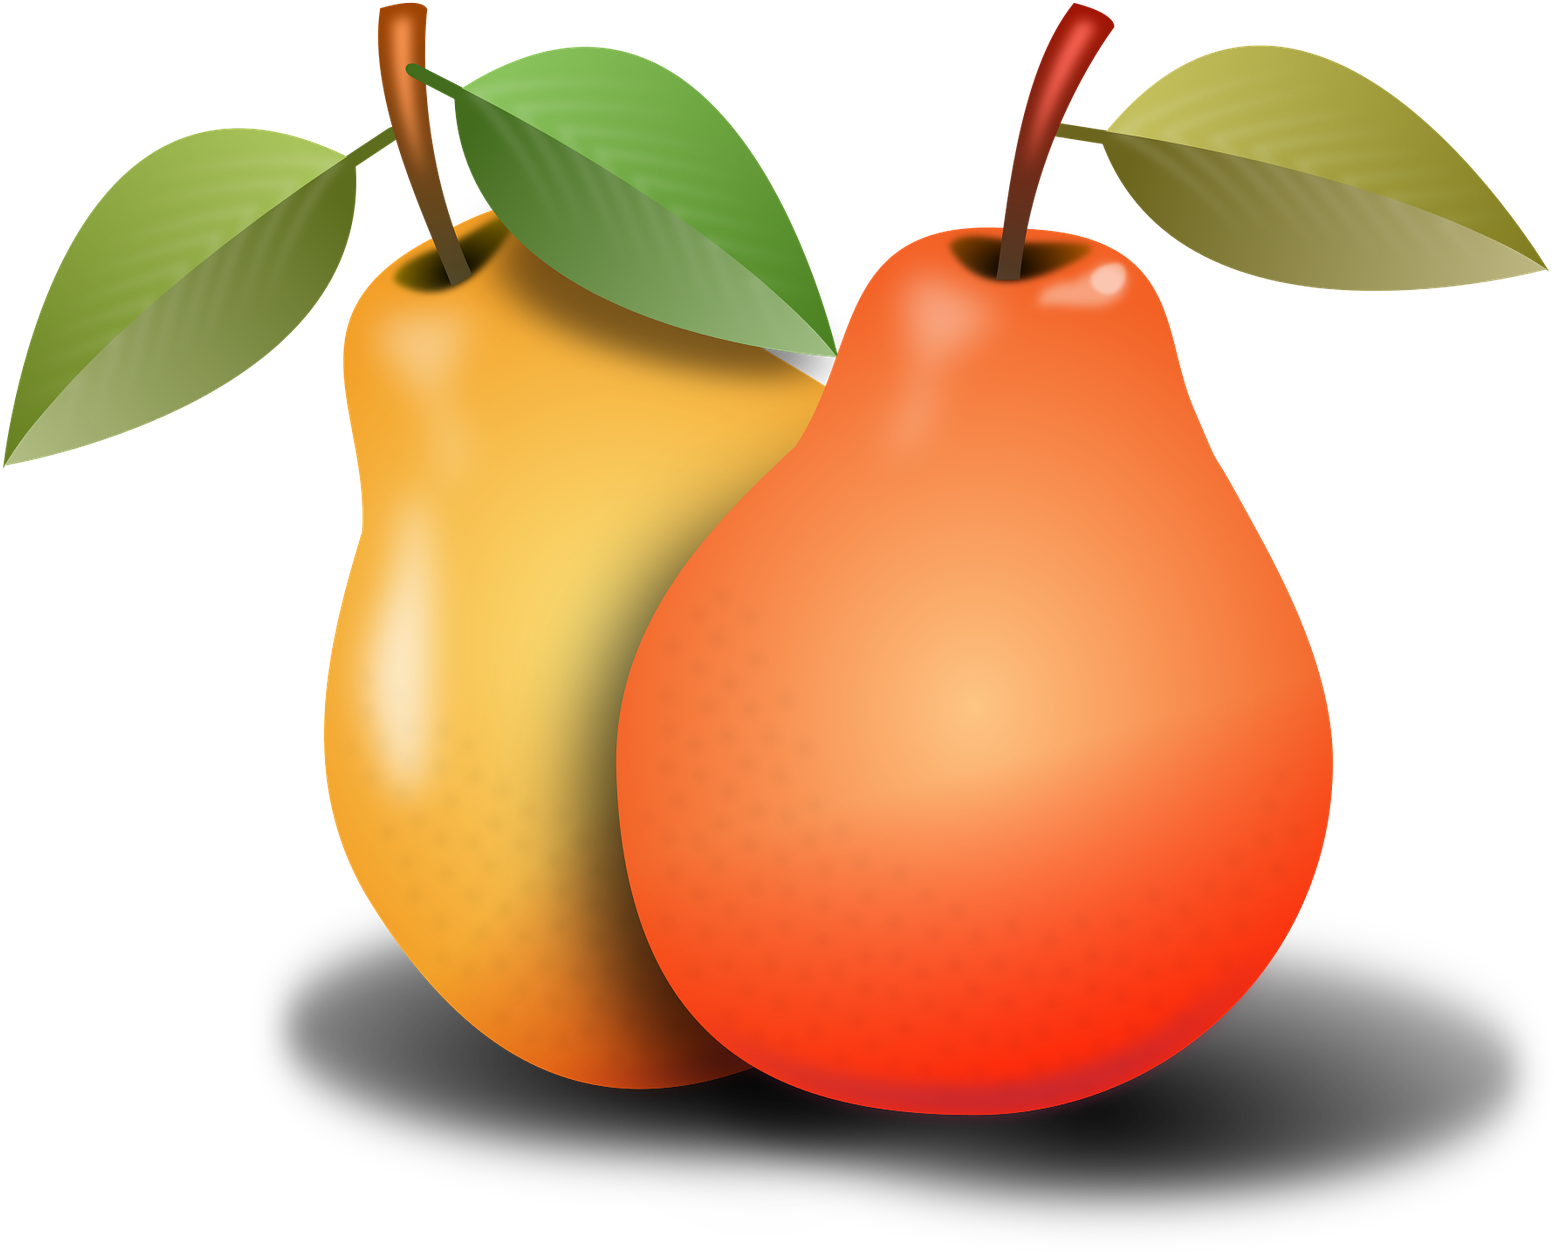 Two Pears Illustration PNG